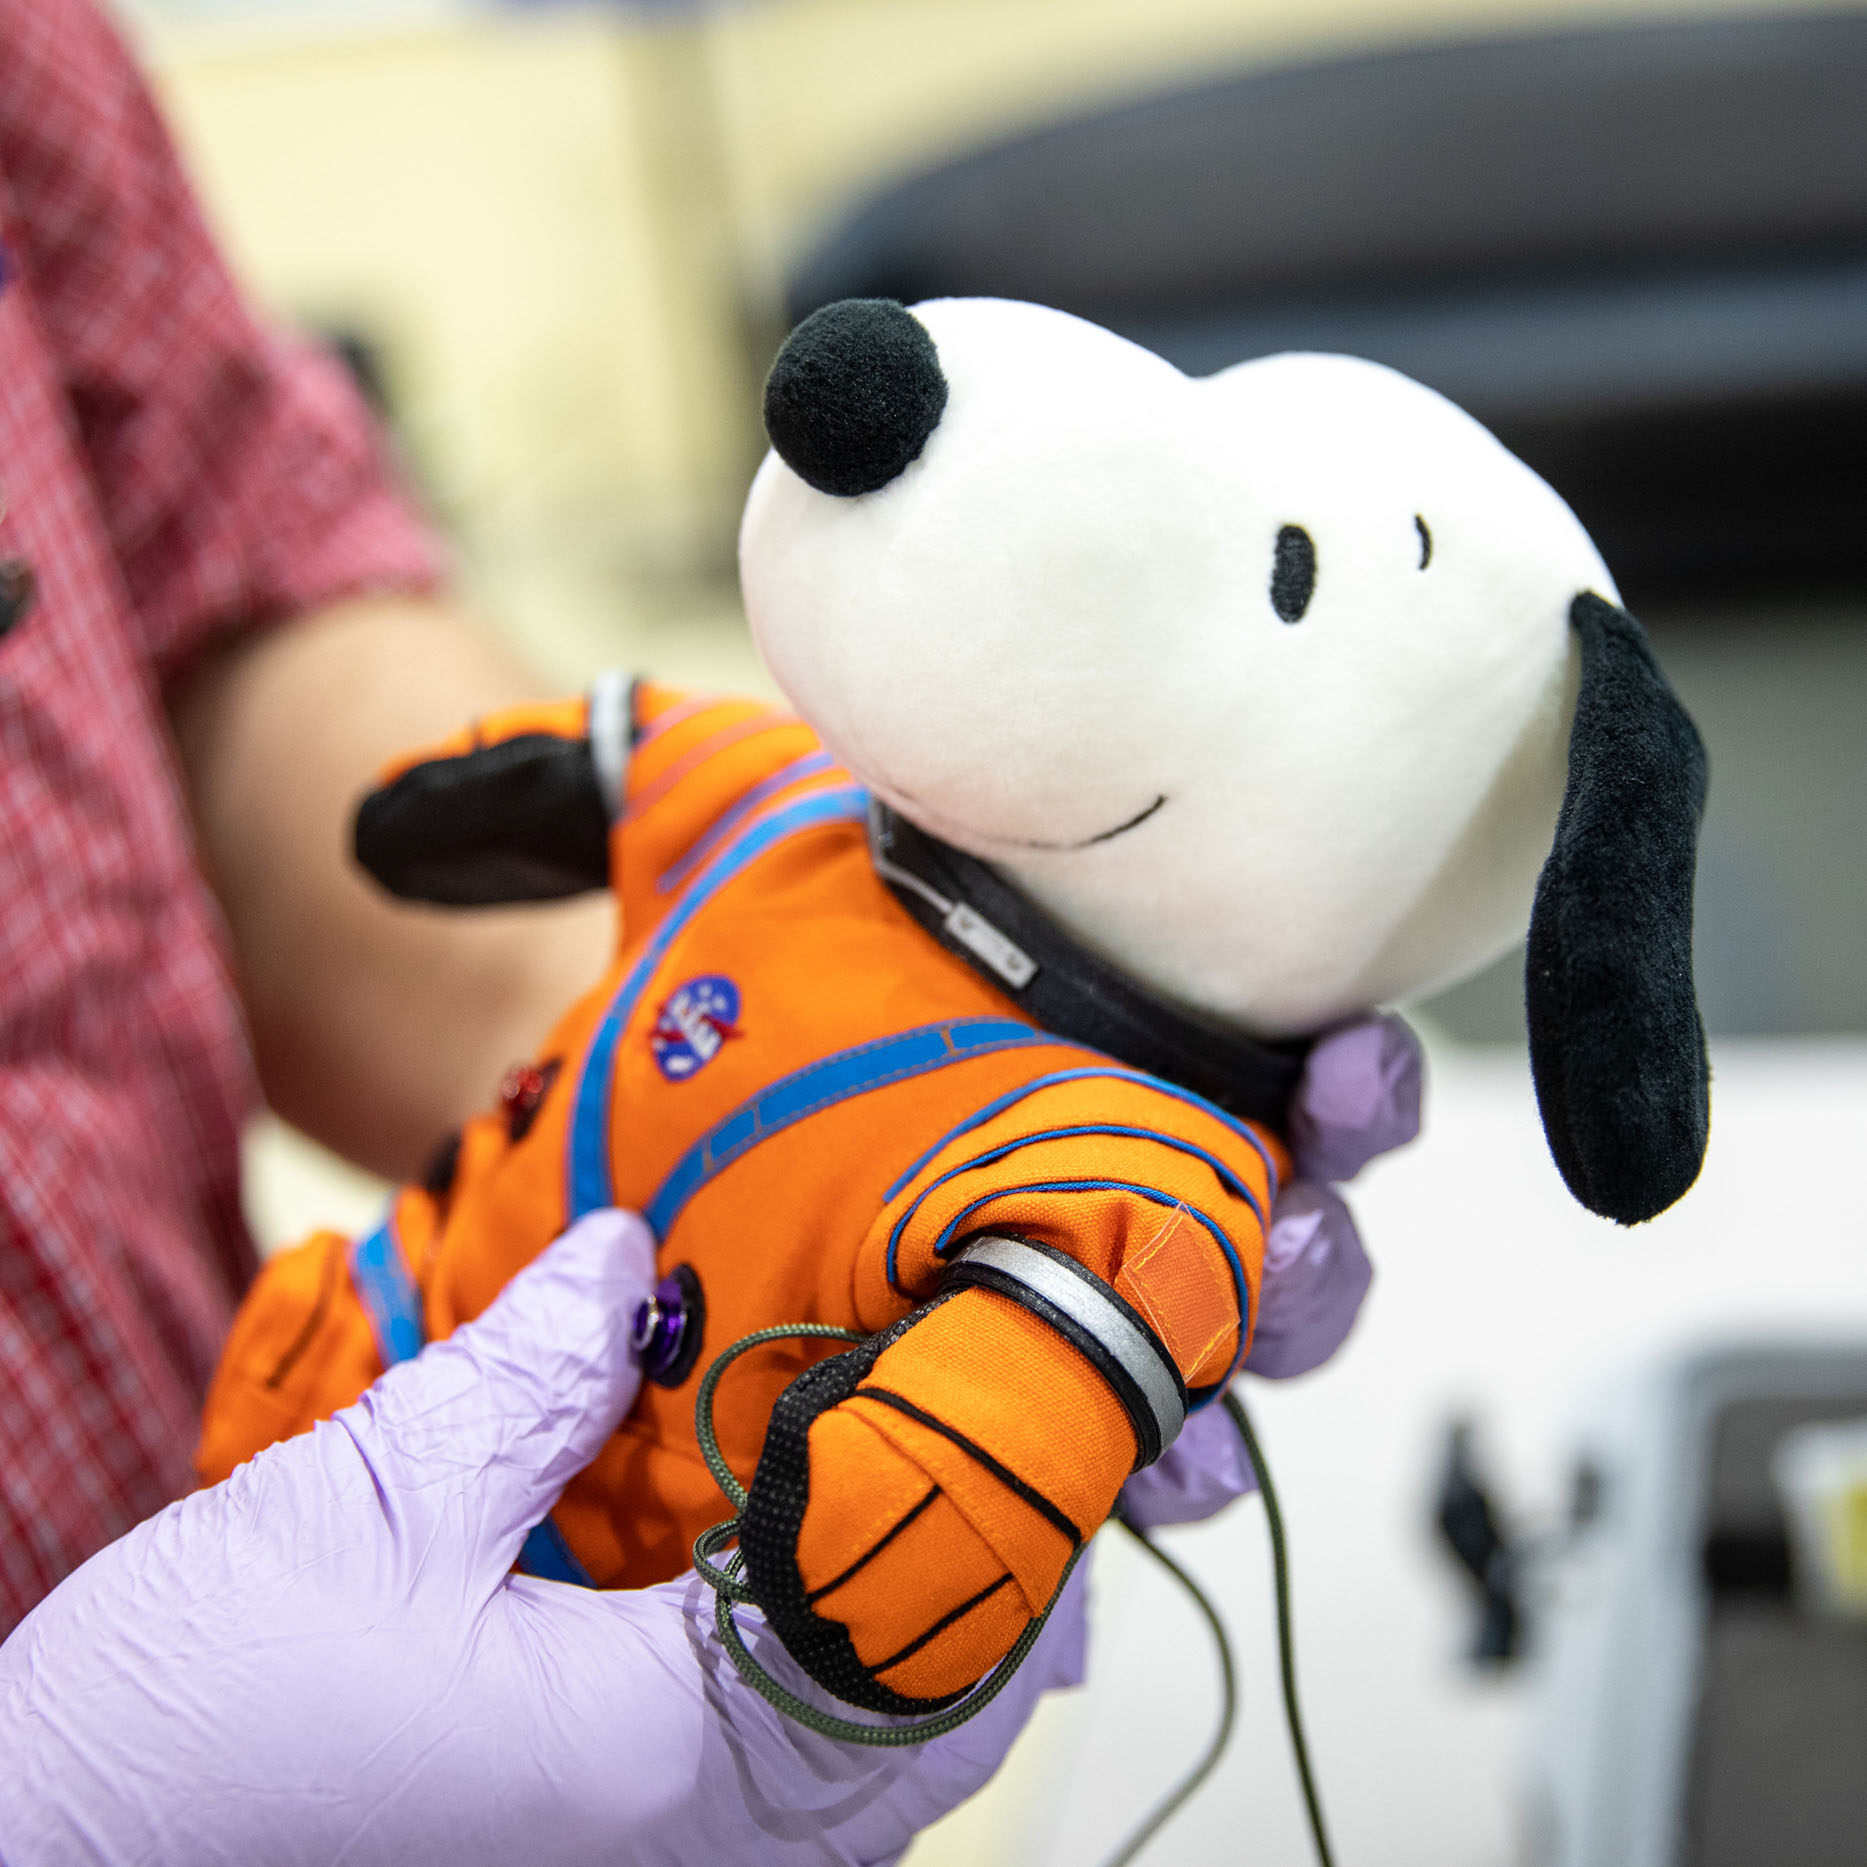 Snoopy doll being unpacked after flying aboard the successful Artemis I mission beyond the moon and back.